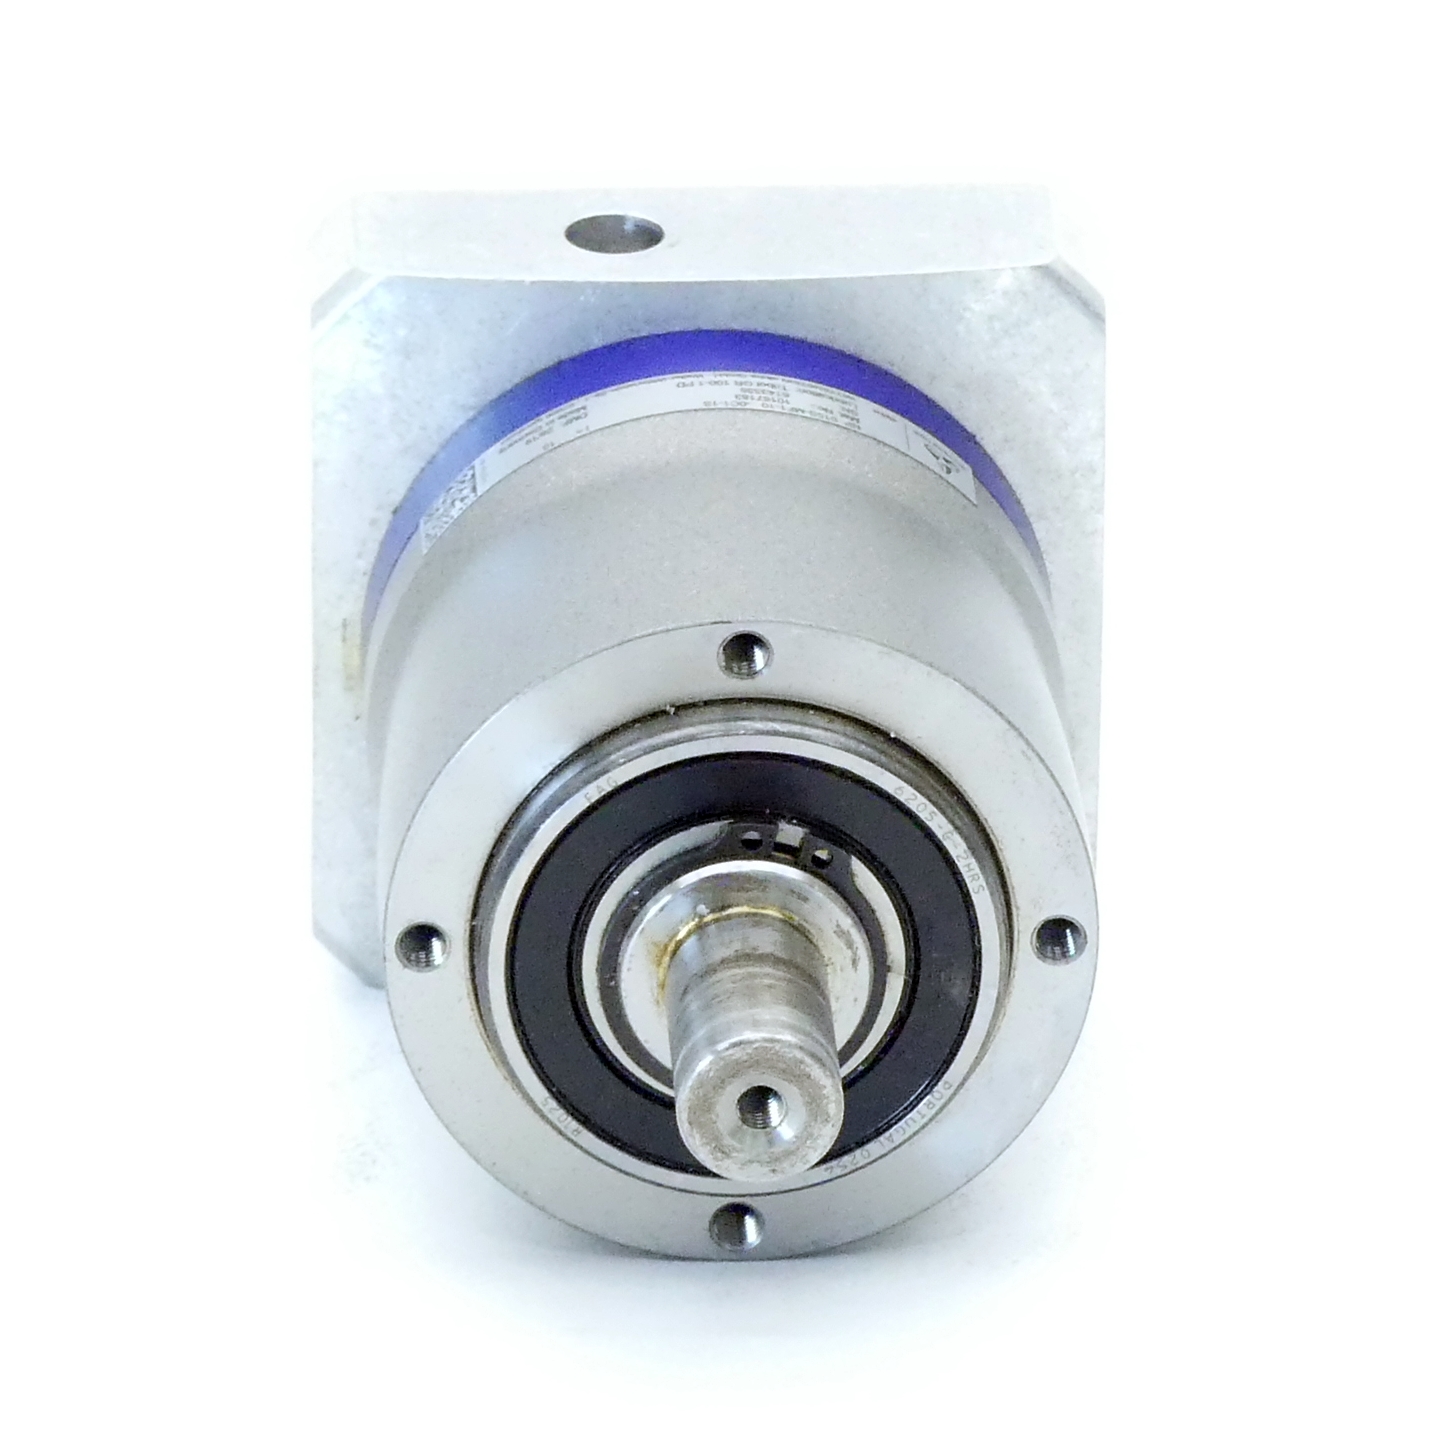 Planetary gearbox 